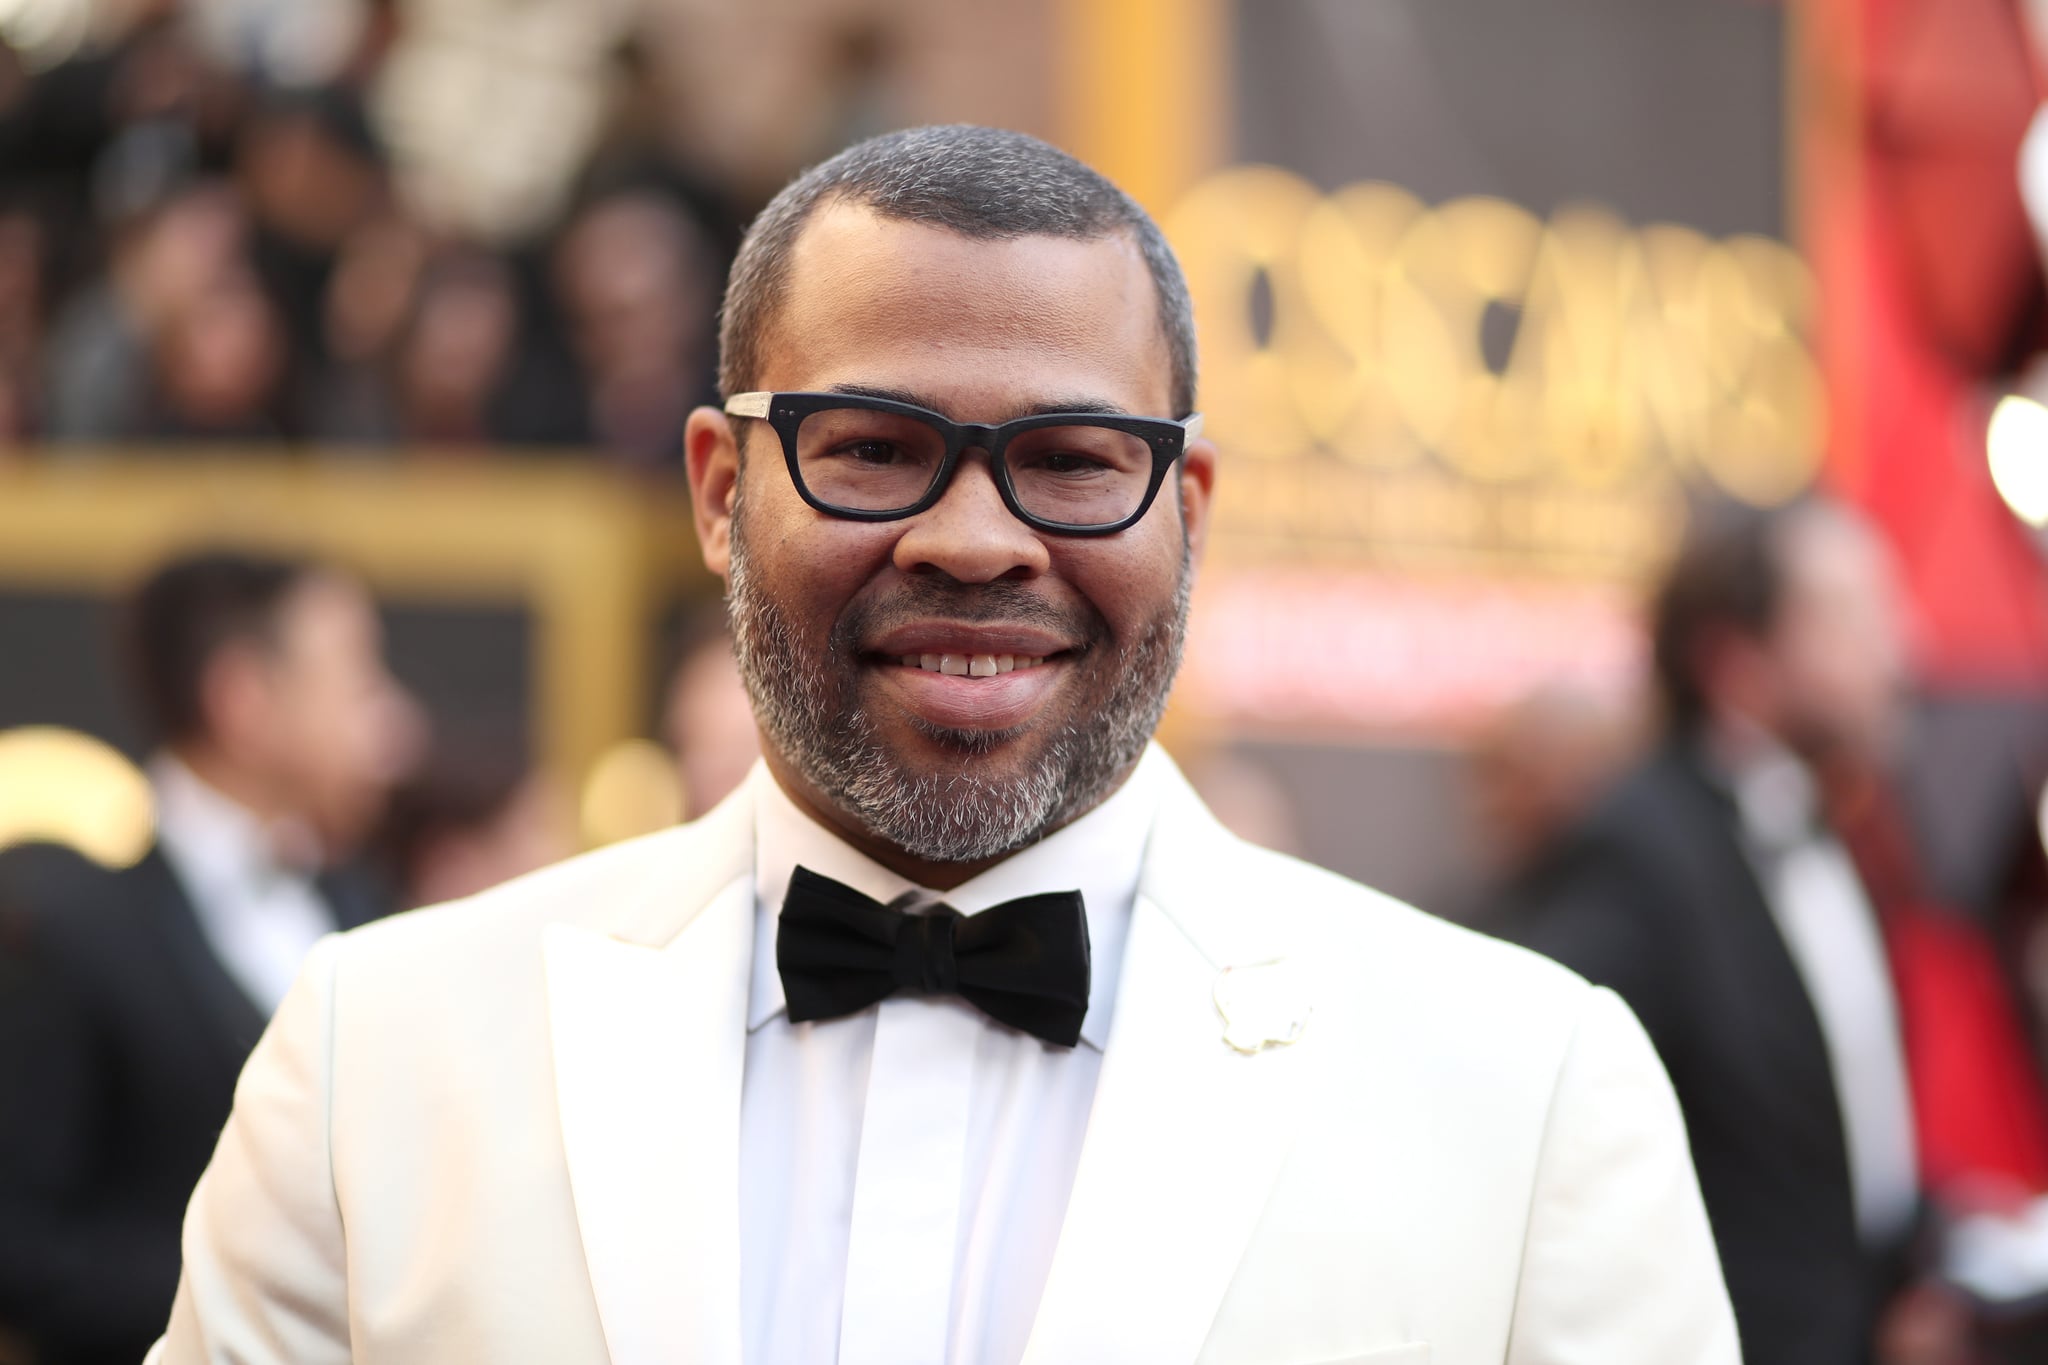 HOLLYWOOD, CA - MARCH 04:  Jordan Peele attends the 90th Annual Academy Awards at Hollywood & Highland centre on March 4, 2018 in Hollywood, California.  (Photo by Christopher Polk/Getty Images)